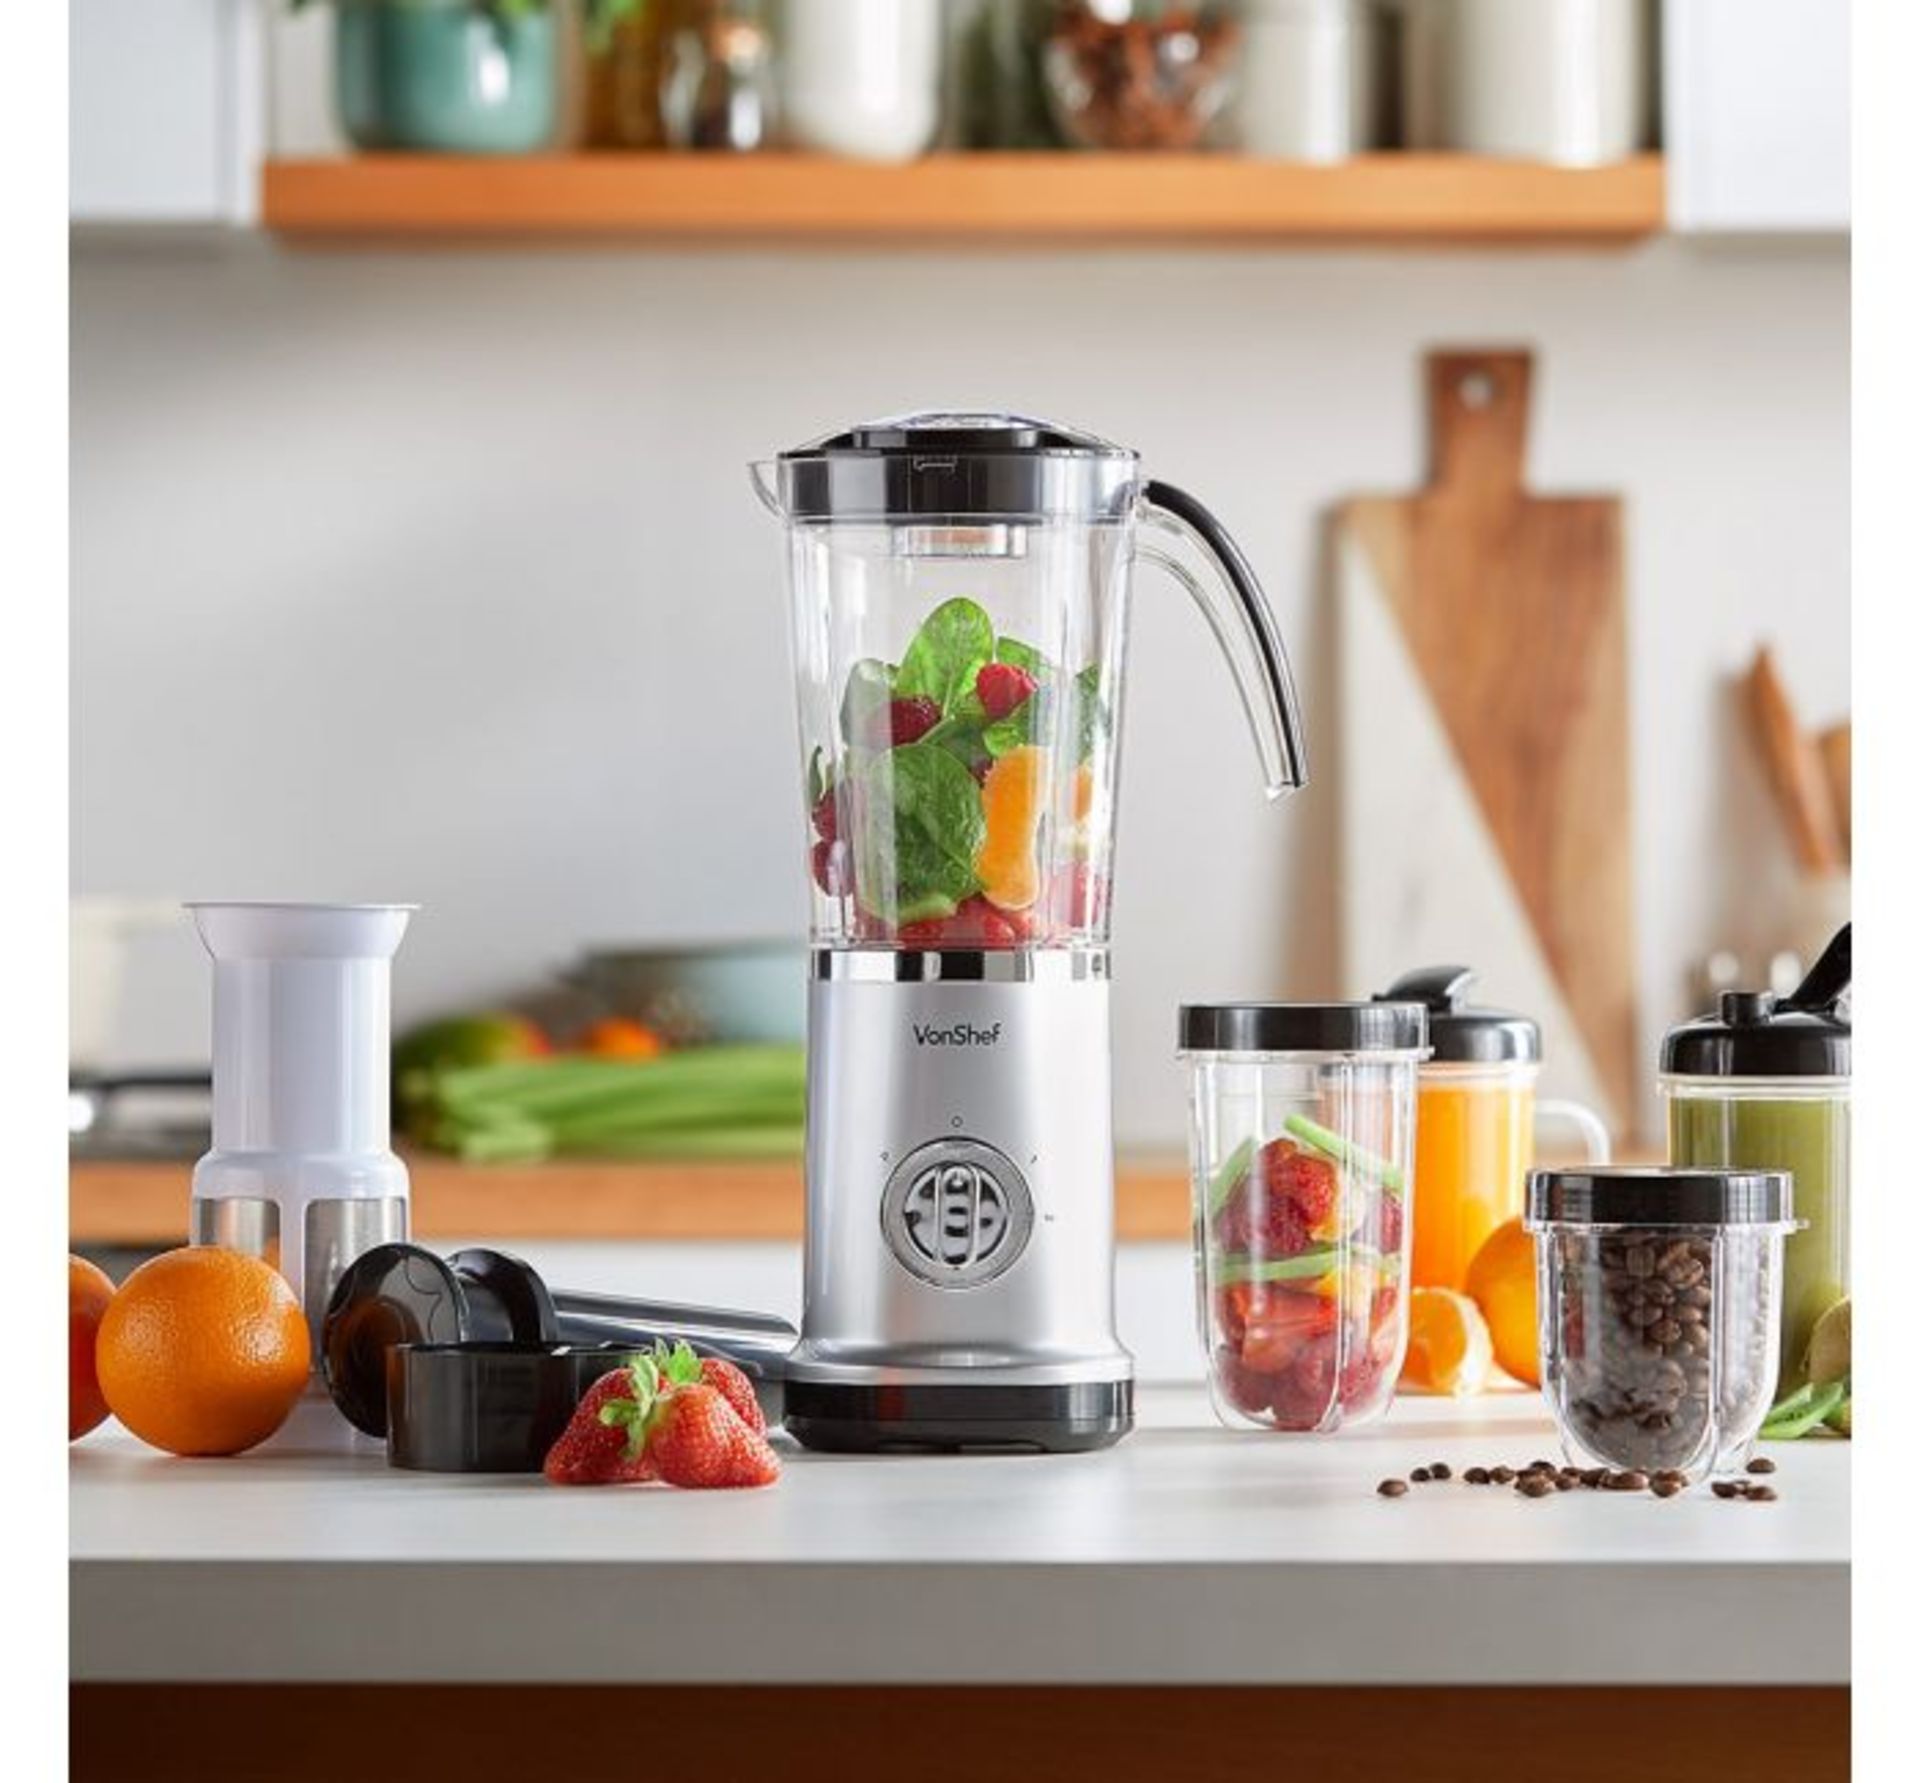 (OM35) 4-in-1 Blender Includes attachments for blending, grinding and juicing, as well as stro...